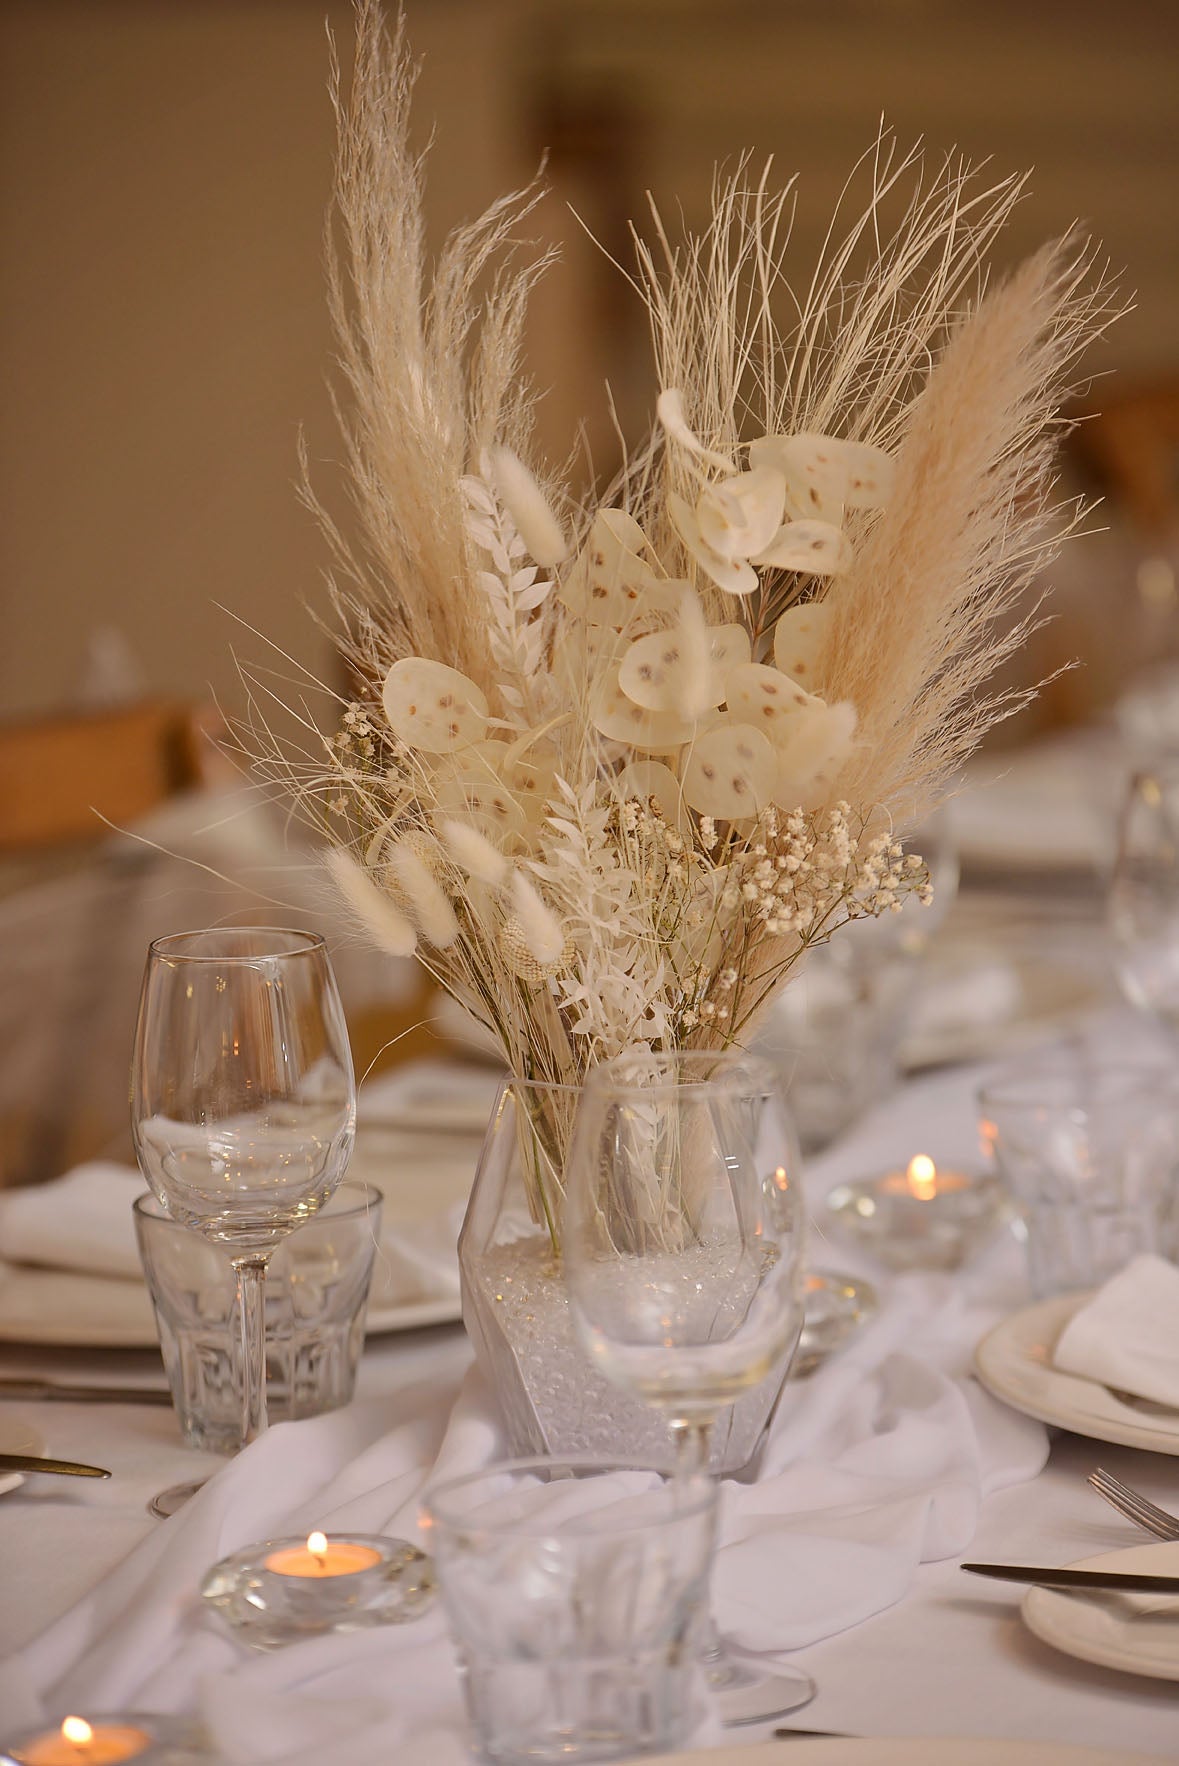 Reception styling - Dried flowers